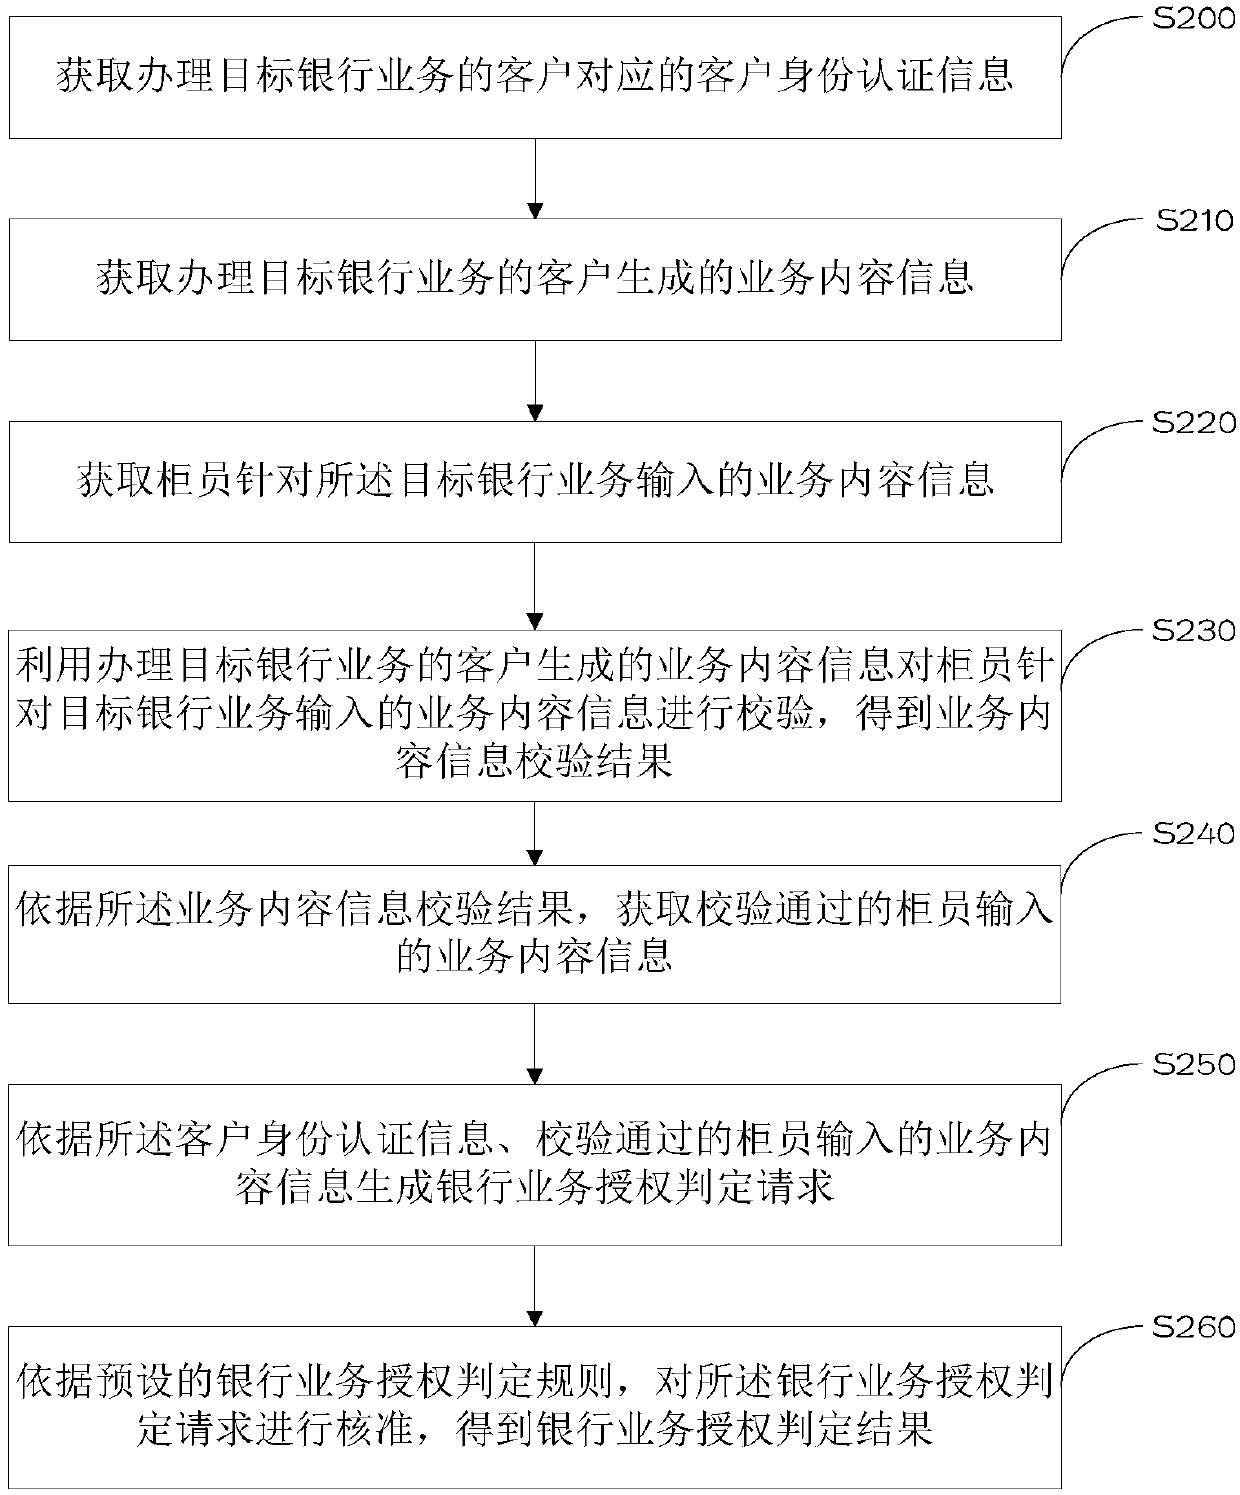 Bank service authorization judgment method and system